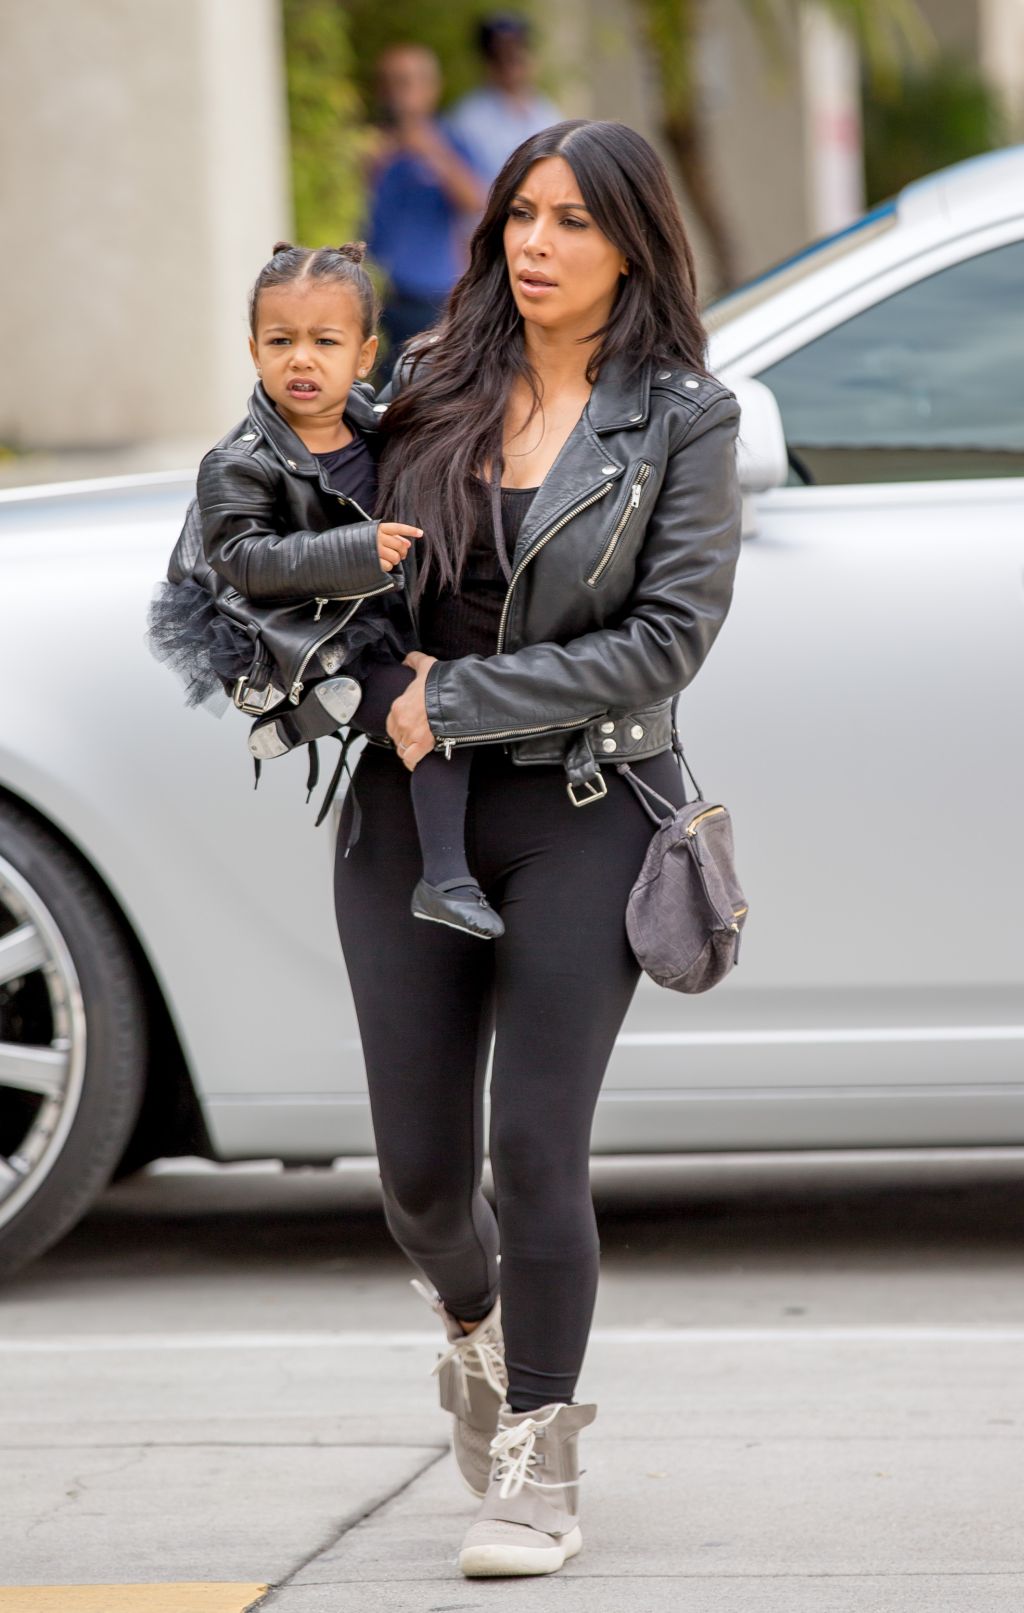 Kim and Kourtney Kardashian drop off North West and Penelope Disick at ballet class